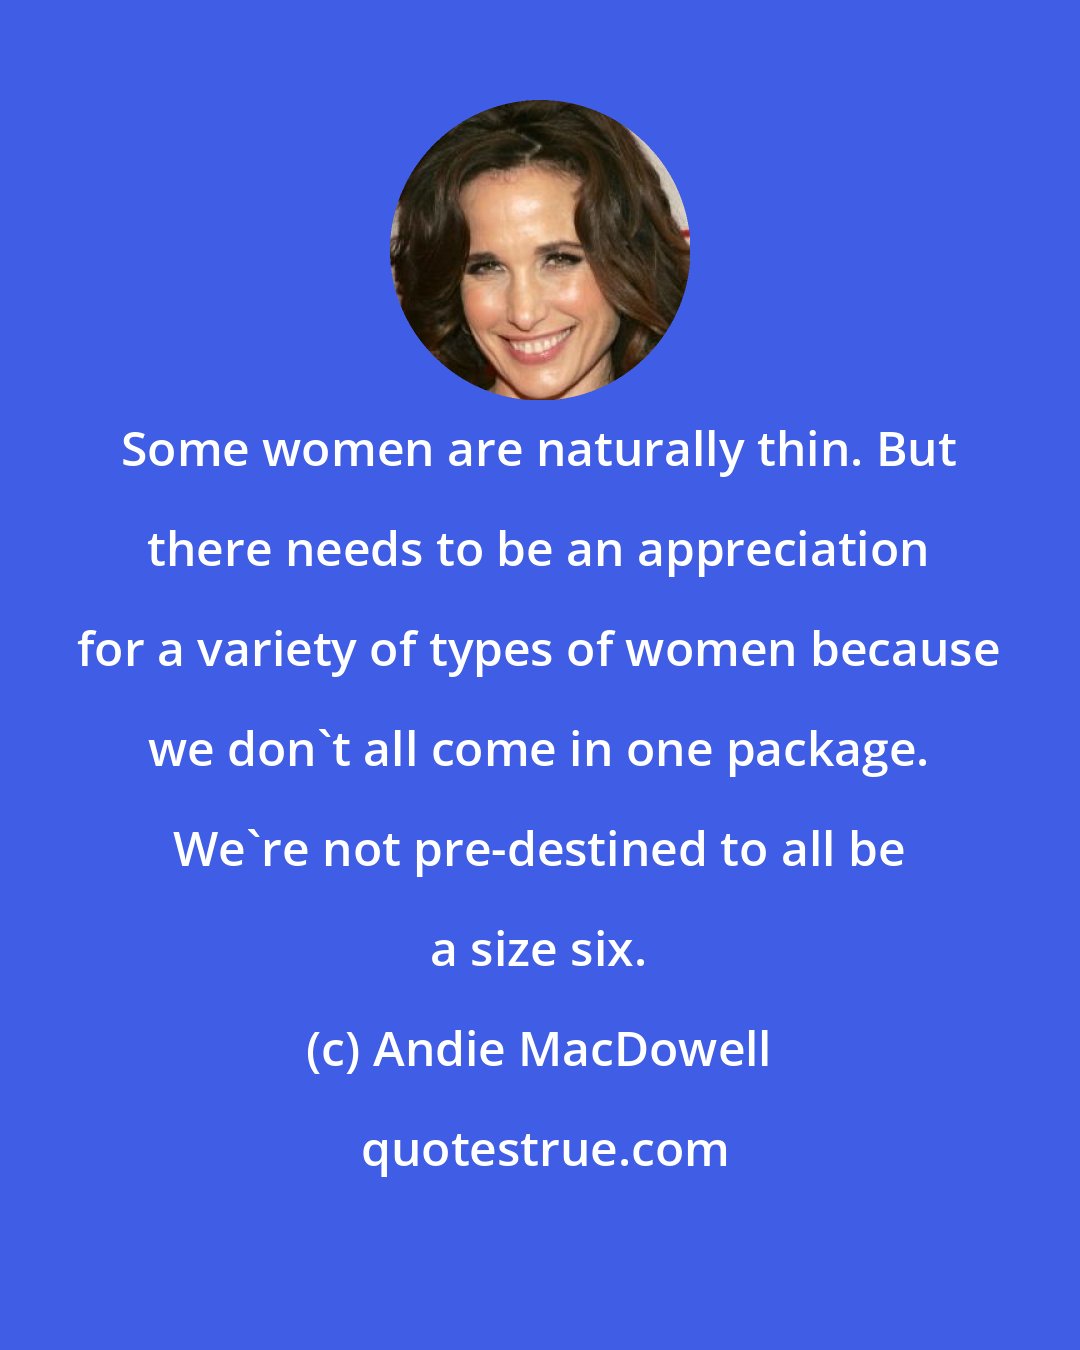 Andie MacDowell: Some women are naturally thin. But there needs to be an appreciation for a variety of types of women because we don't all come in one package. We're not pre-destined to all be a size six.